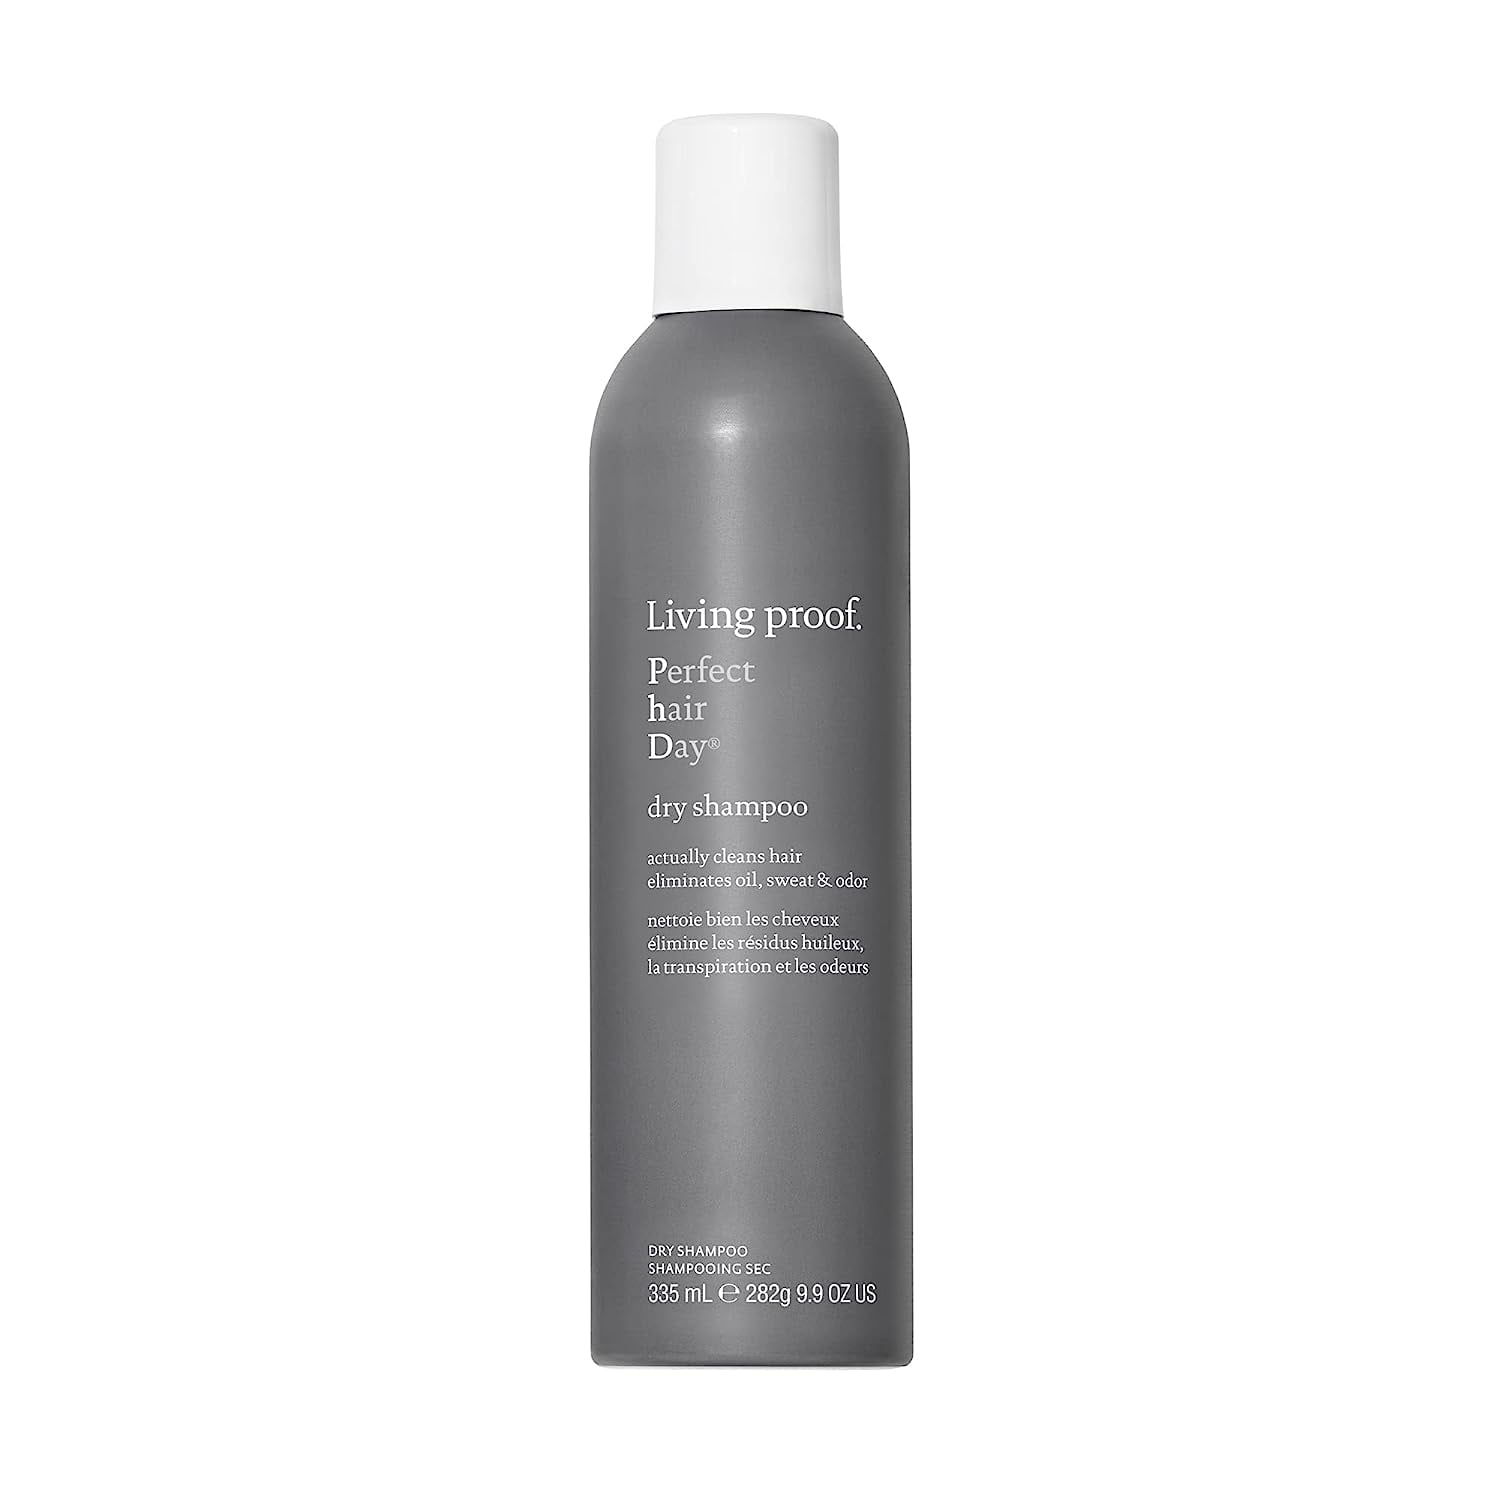 Best Prime Day Beauty Deal on a Dry Shampoo